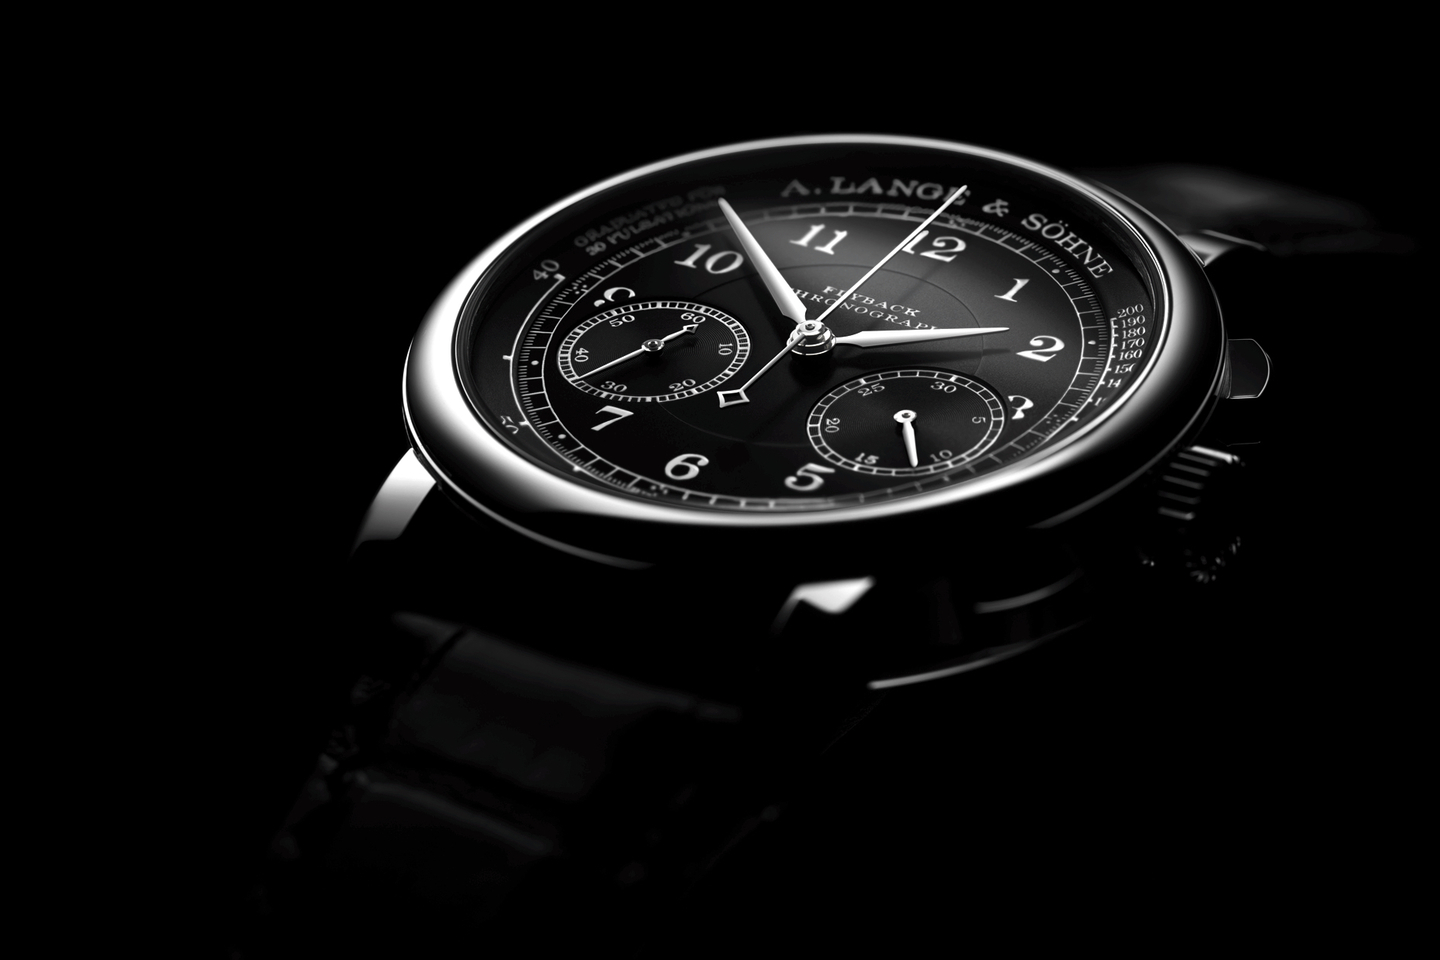 Lange 1815 Chronograph introduced with a black dial